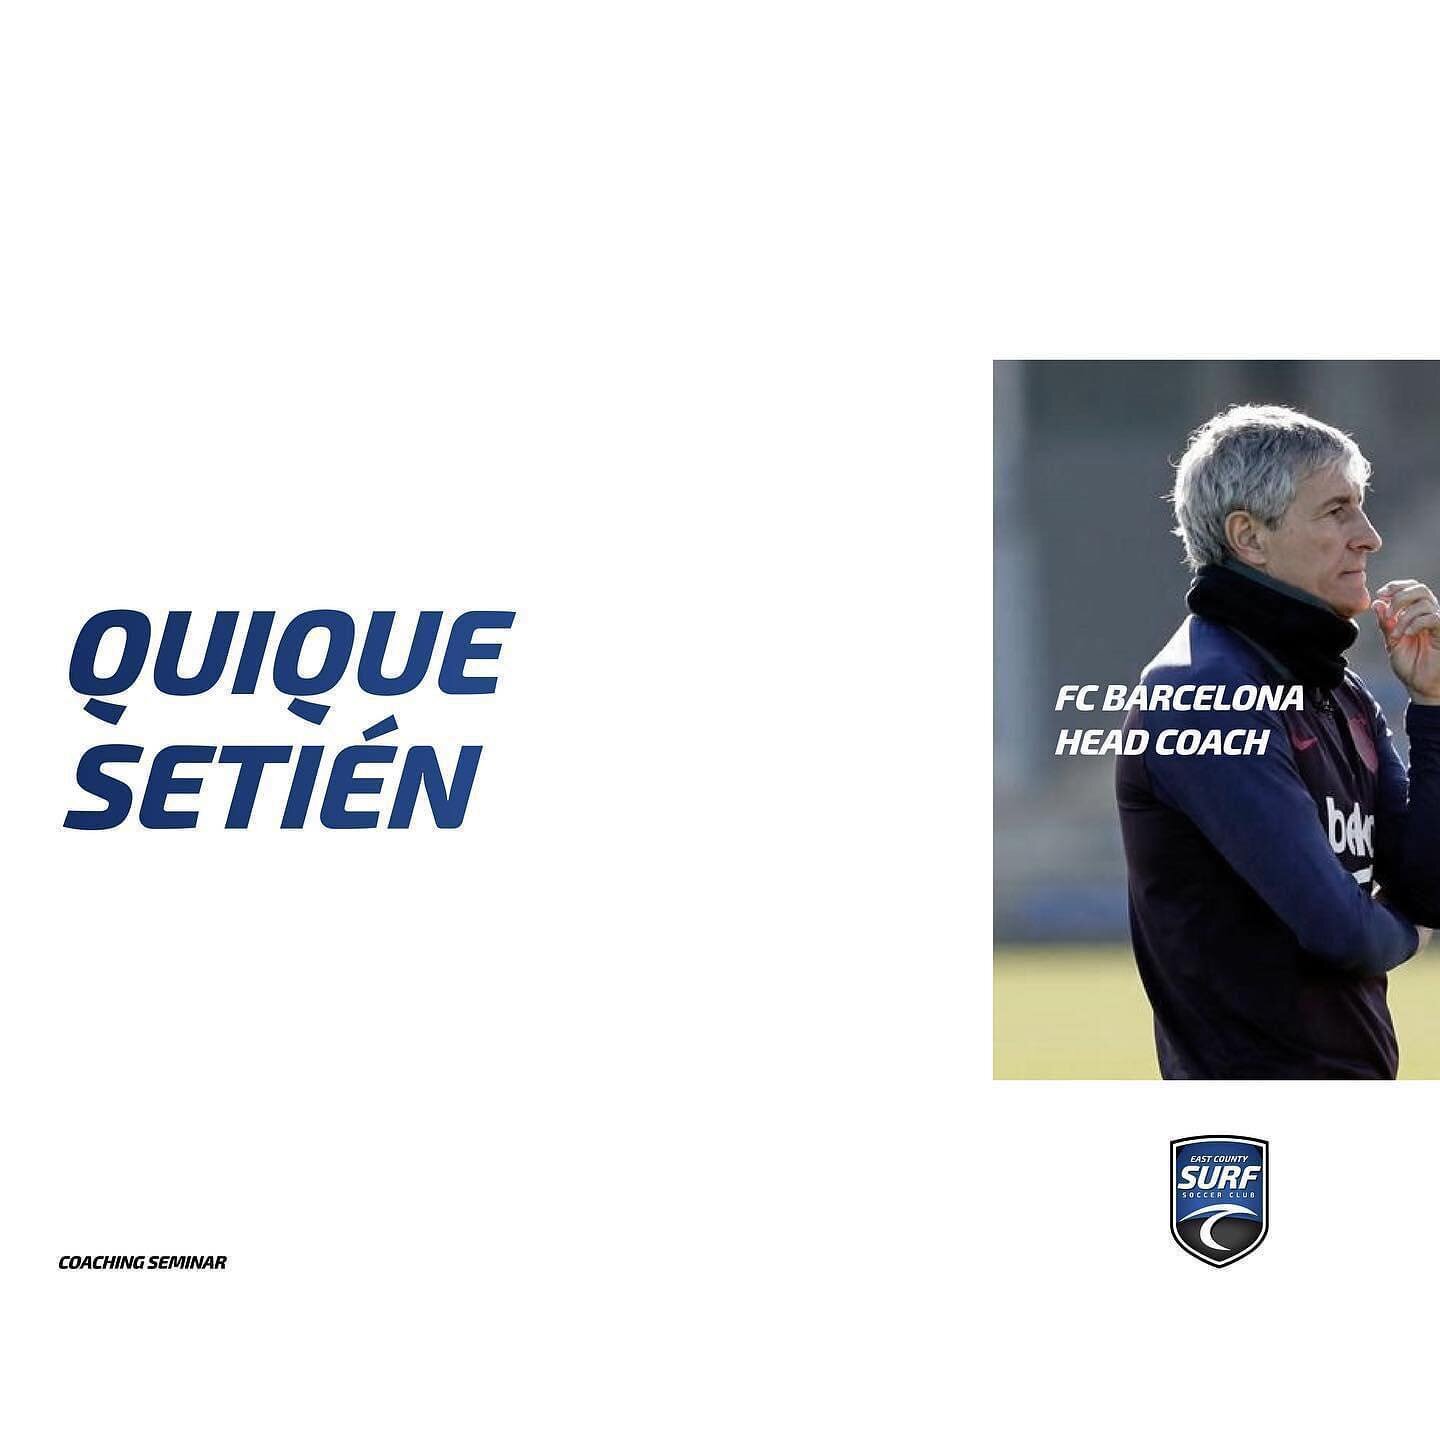 Today CYSM and East County Surf Club are collaborating to present a Webinar with FC Barcelona coach Mister Quique Setien.

This is a great opportunity to expose Southern California youth coaches to Elite COACHING.

#EliteProfessionalSoccer
#Improving